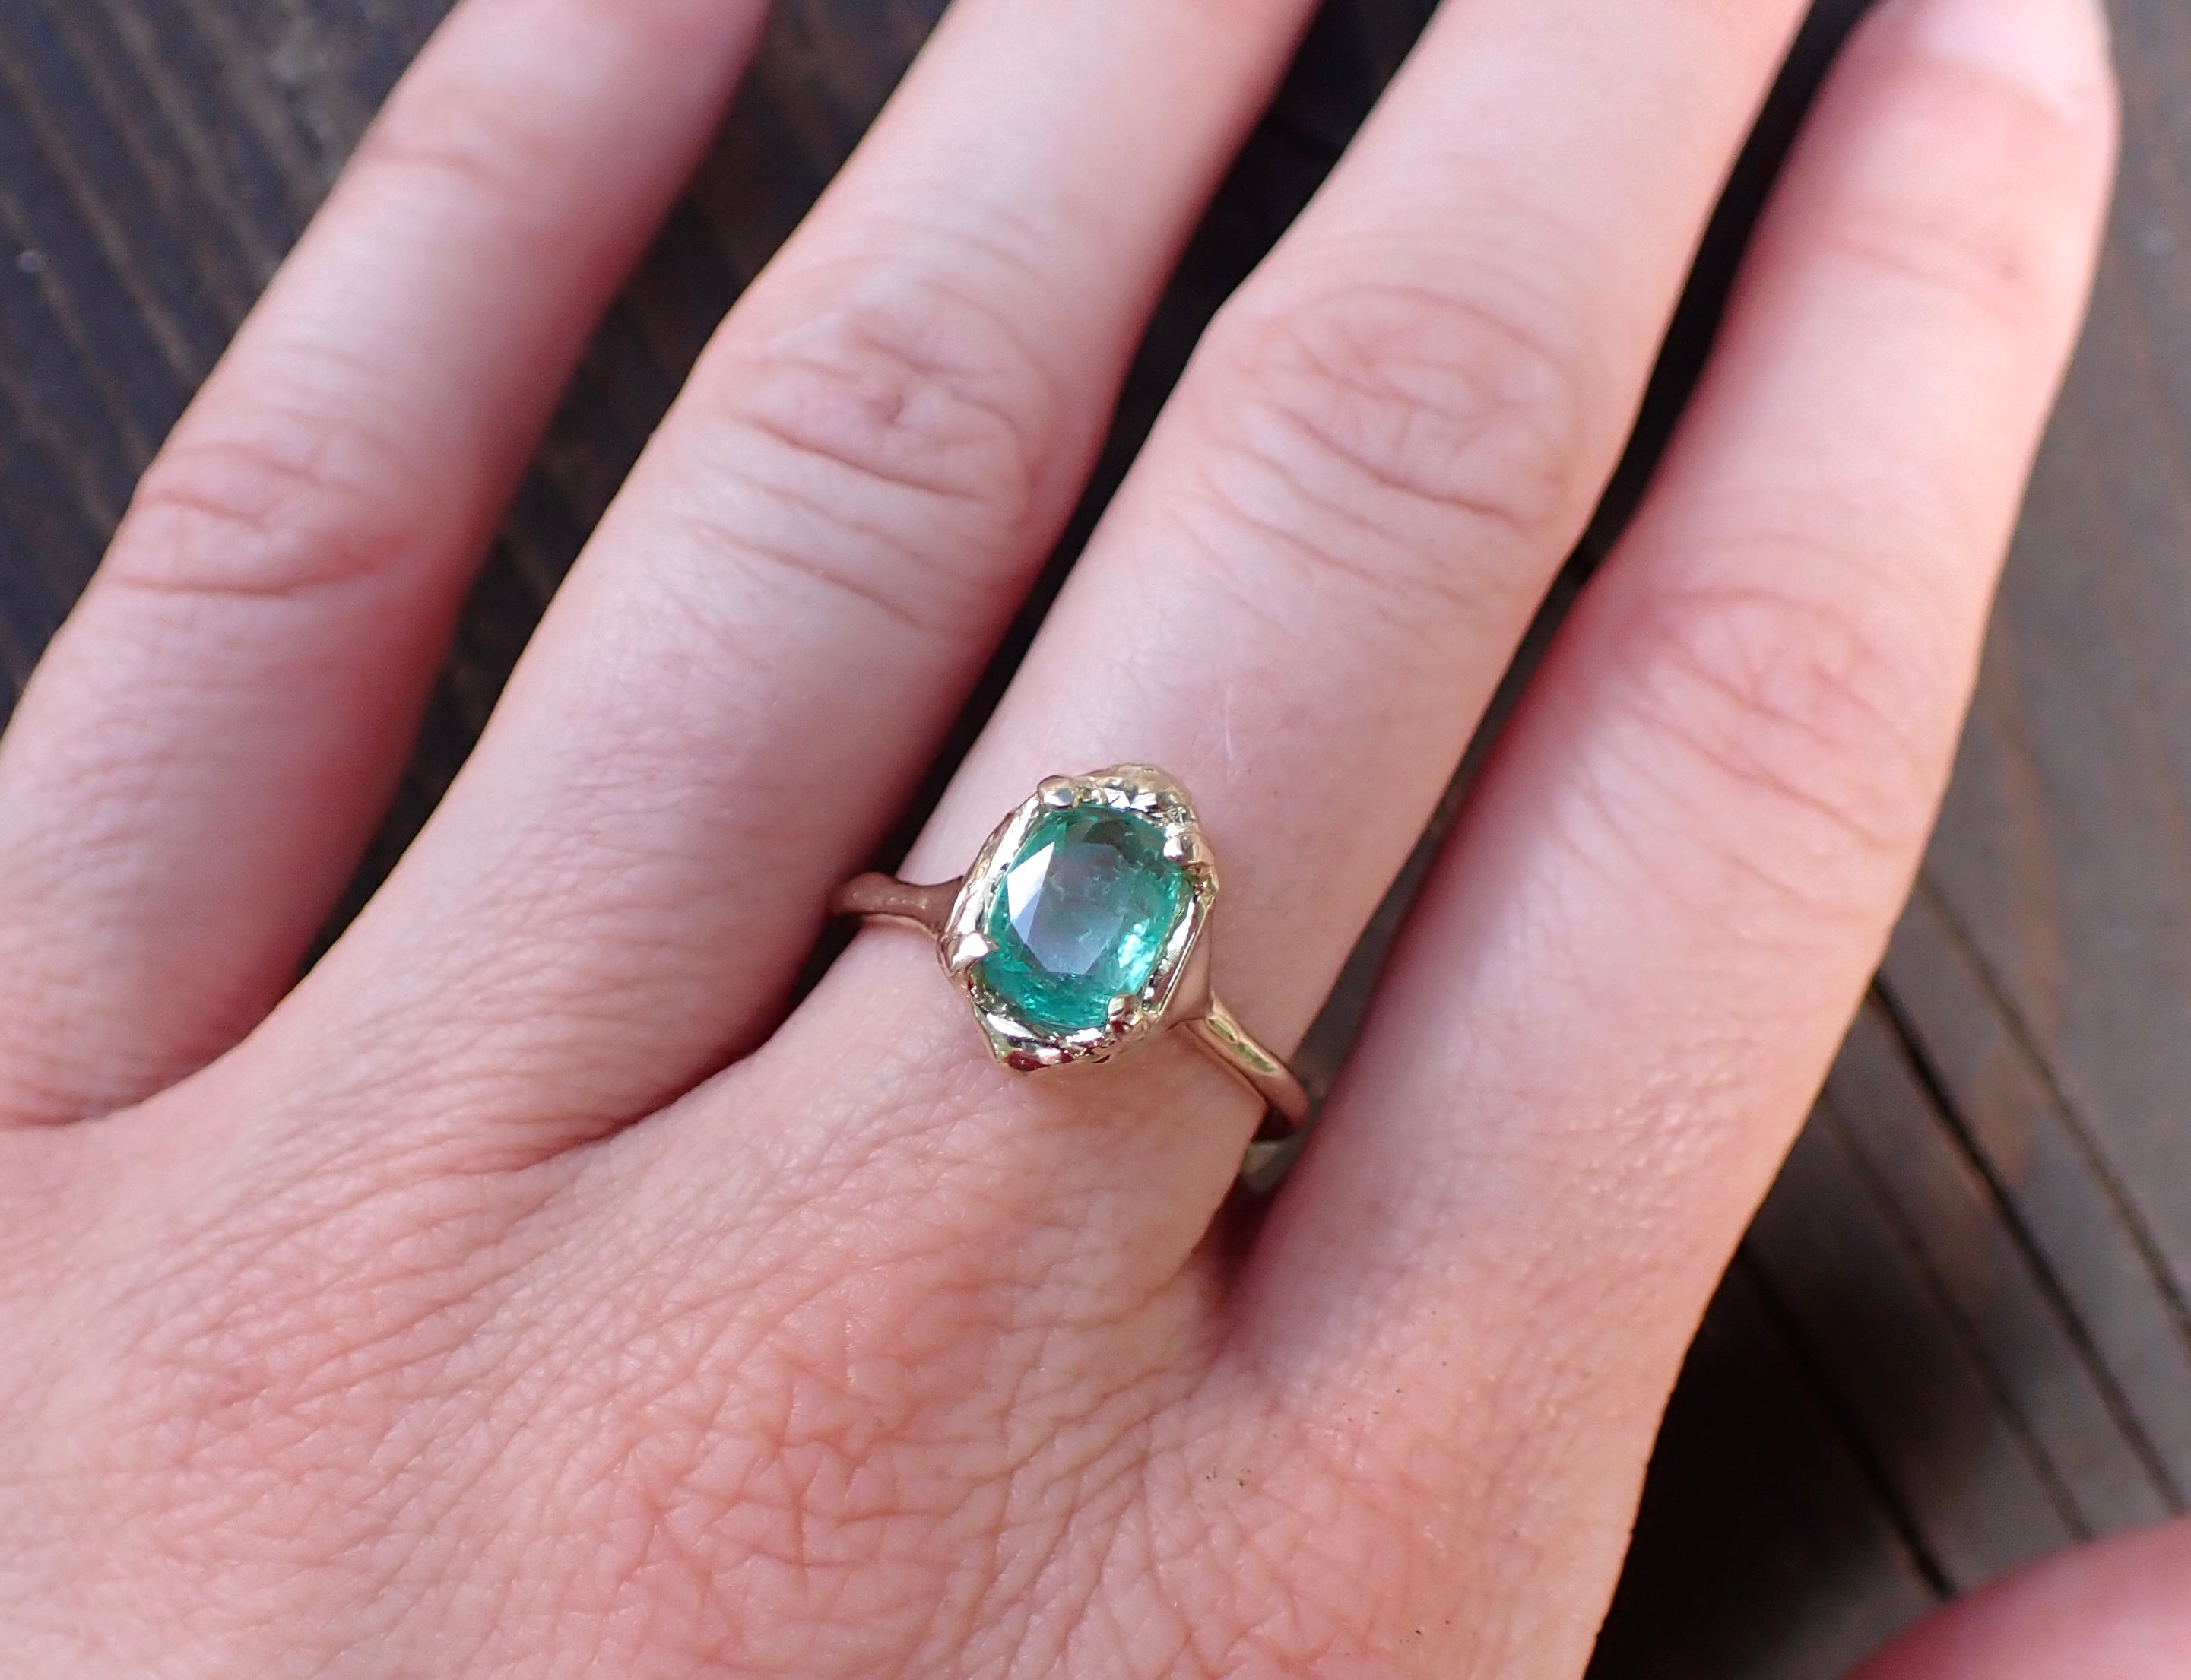 Majestic Natural Emerald in 14k Gold Setting - mossNstone